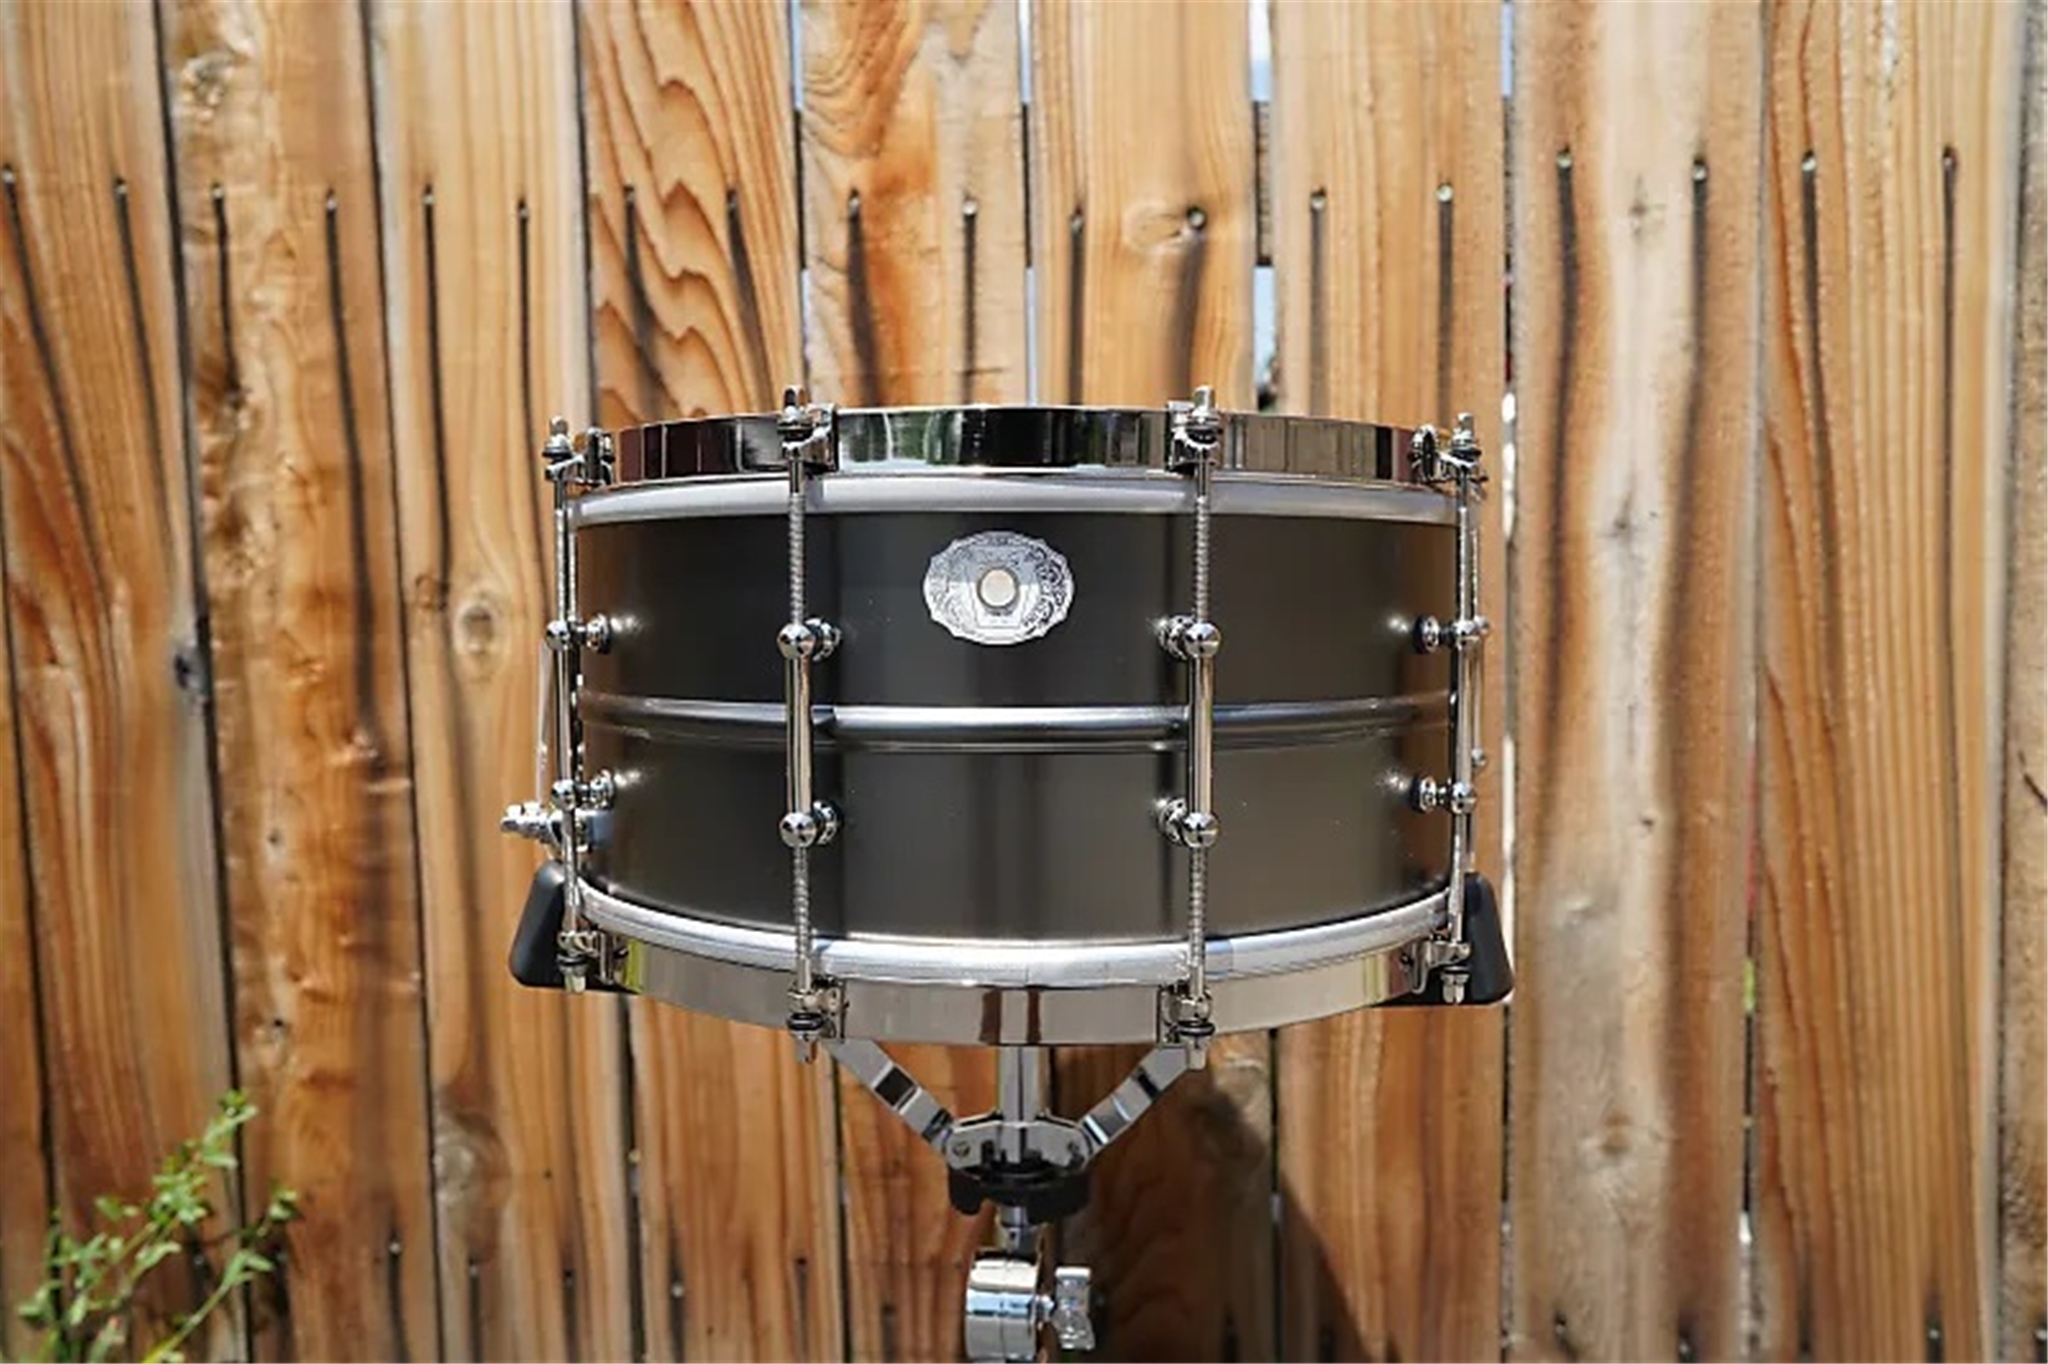 Ludwig Limited Edition #LB-417ST Satin Deluxe Black Beauty 6.5 x 14" Snare Drum (1 of 140 Made Worldwide)